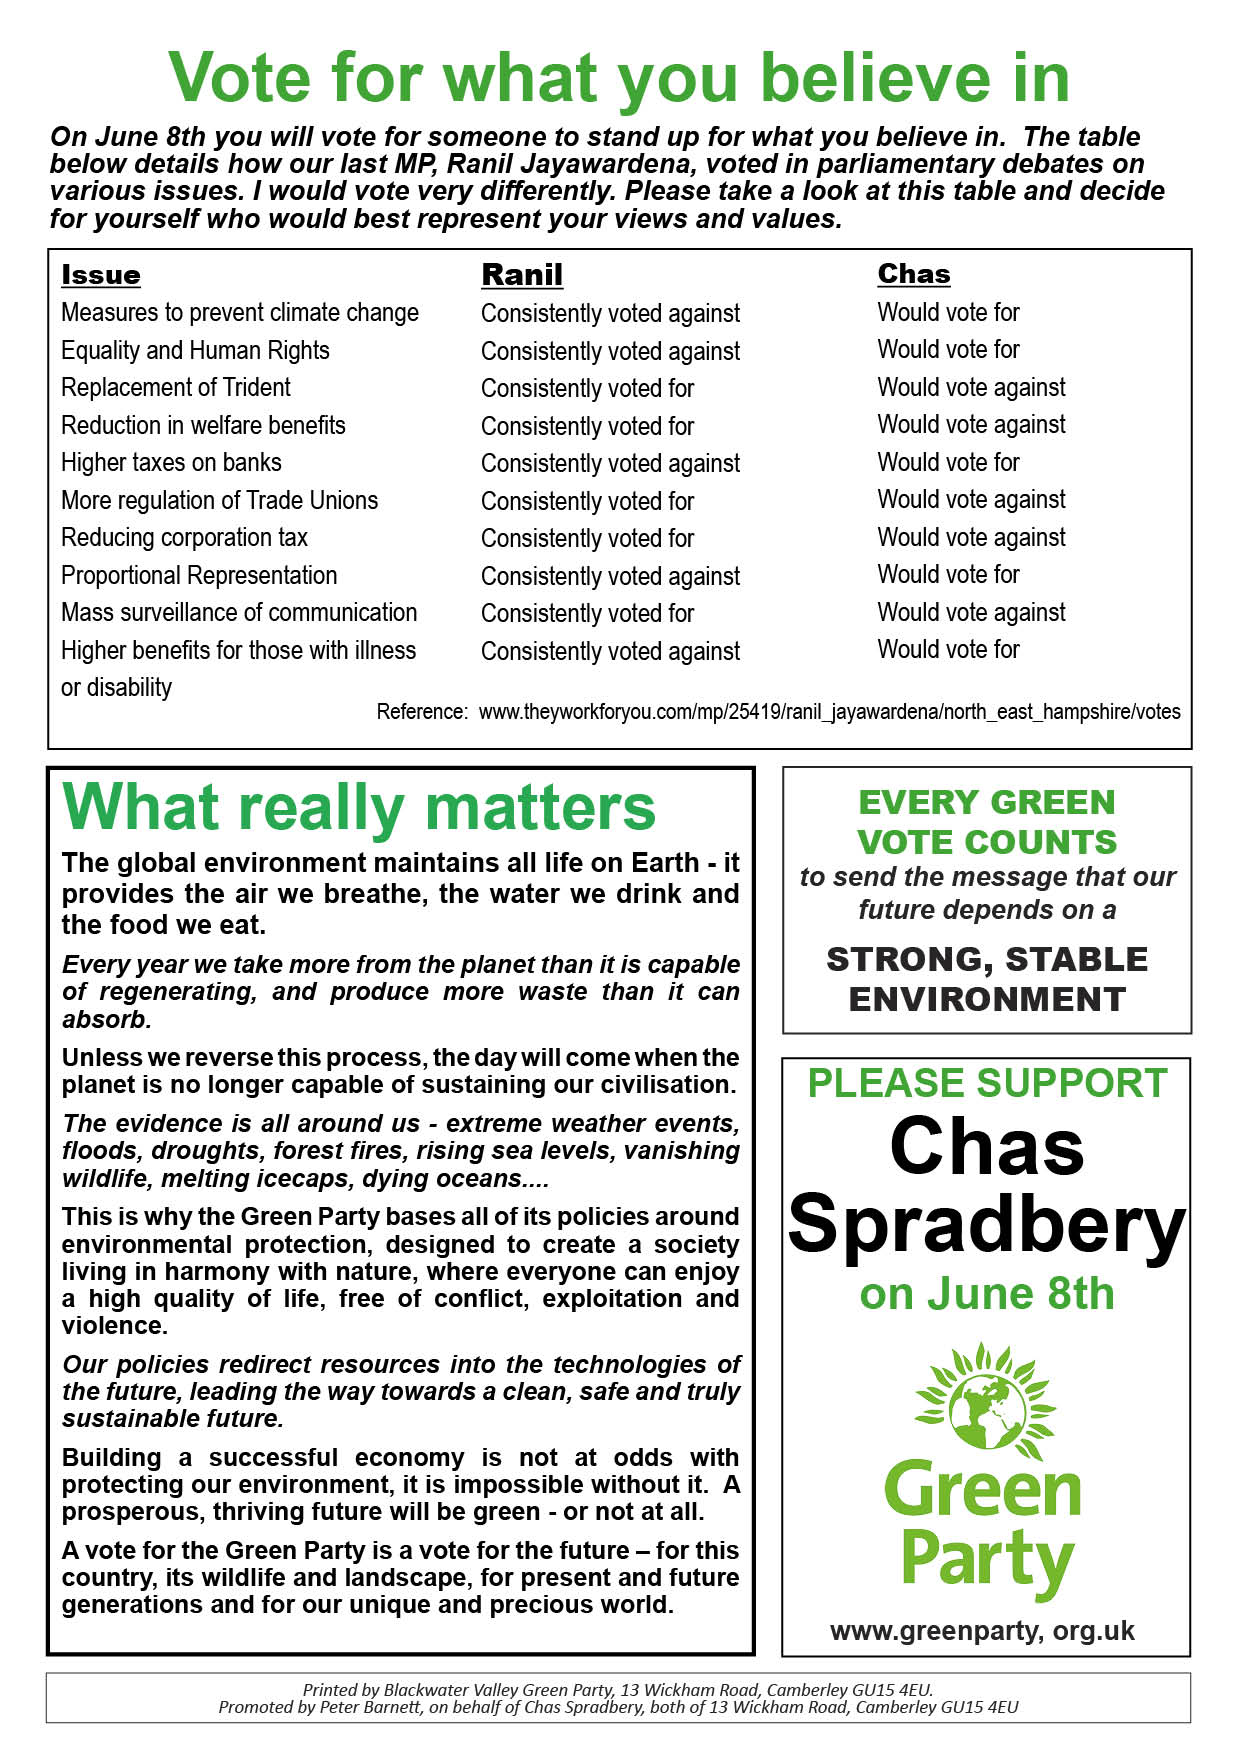 GE2017 Flyer for Chas Spradbery in North East Hampshire